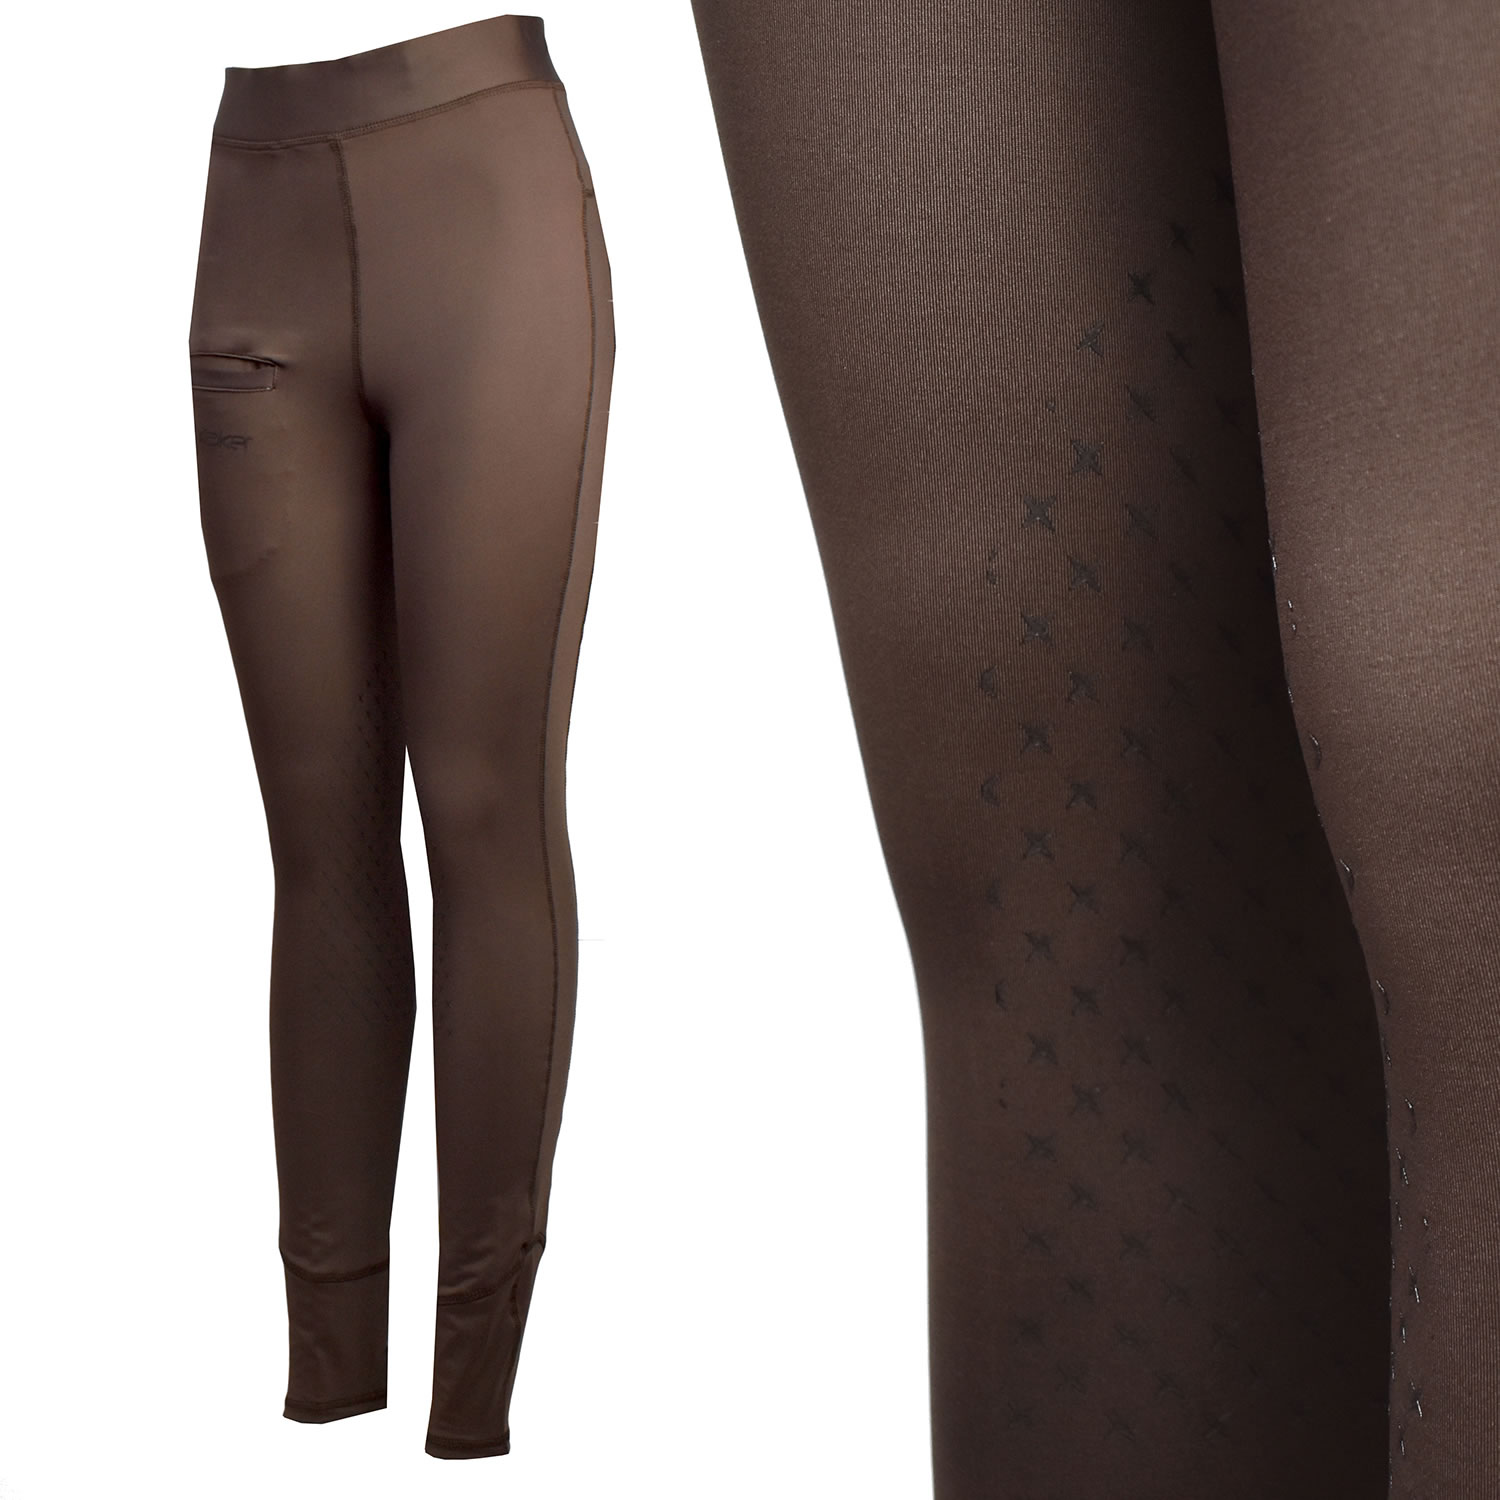 WHITAKER HENSHALL RIDING TIGHTS BROWN  SMALL LADIES